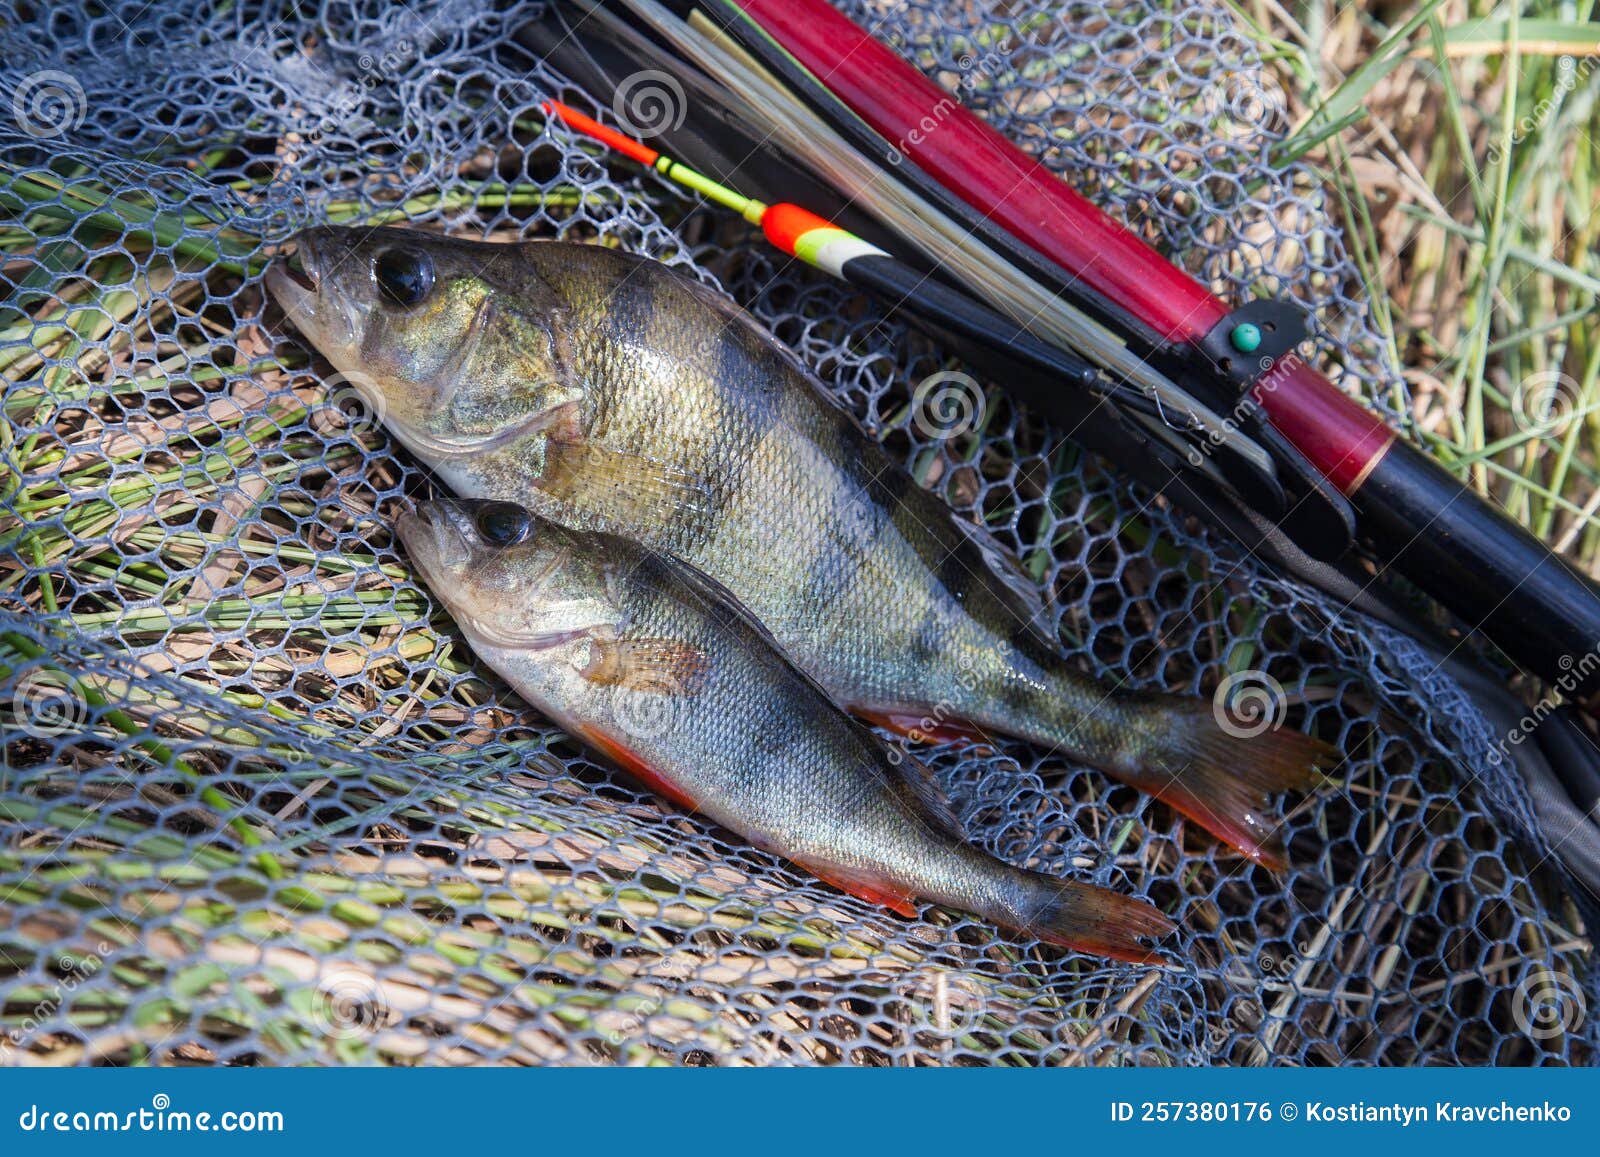 Common Perch or European Perch Perca Fluviatilis with Float Rod on Black  Fishing Net Stock Photo - Image of activity, perch: 257380176